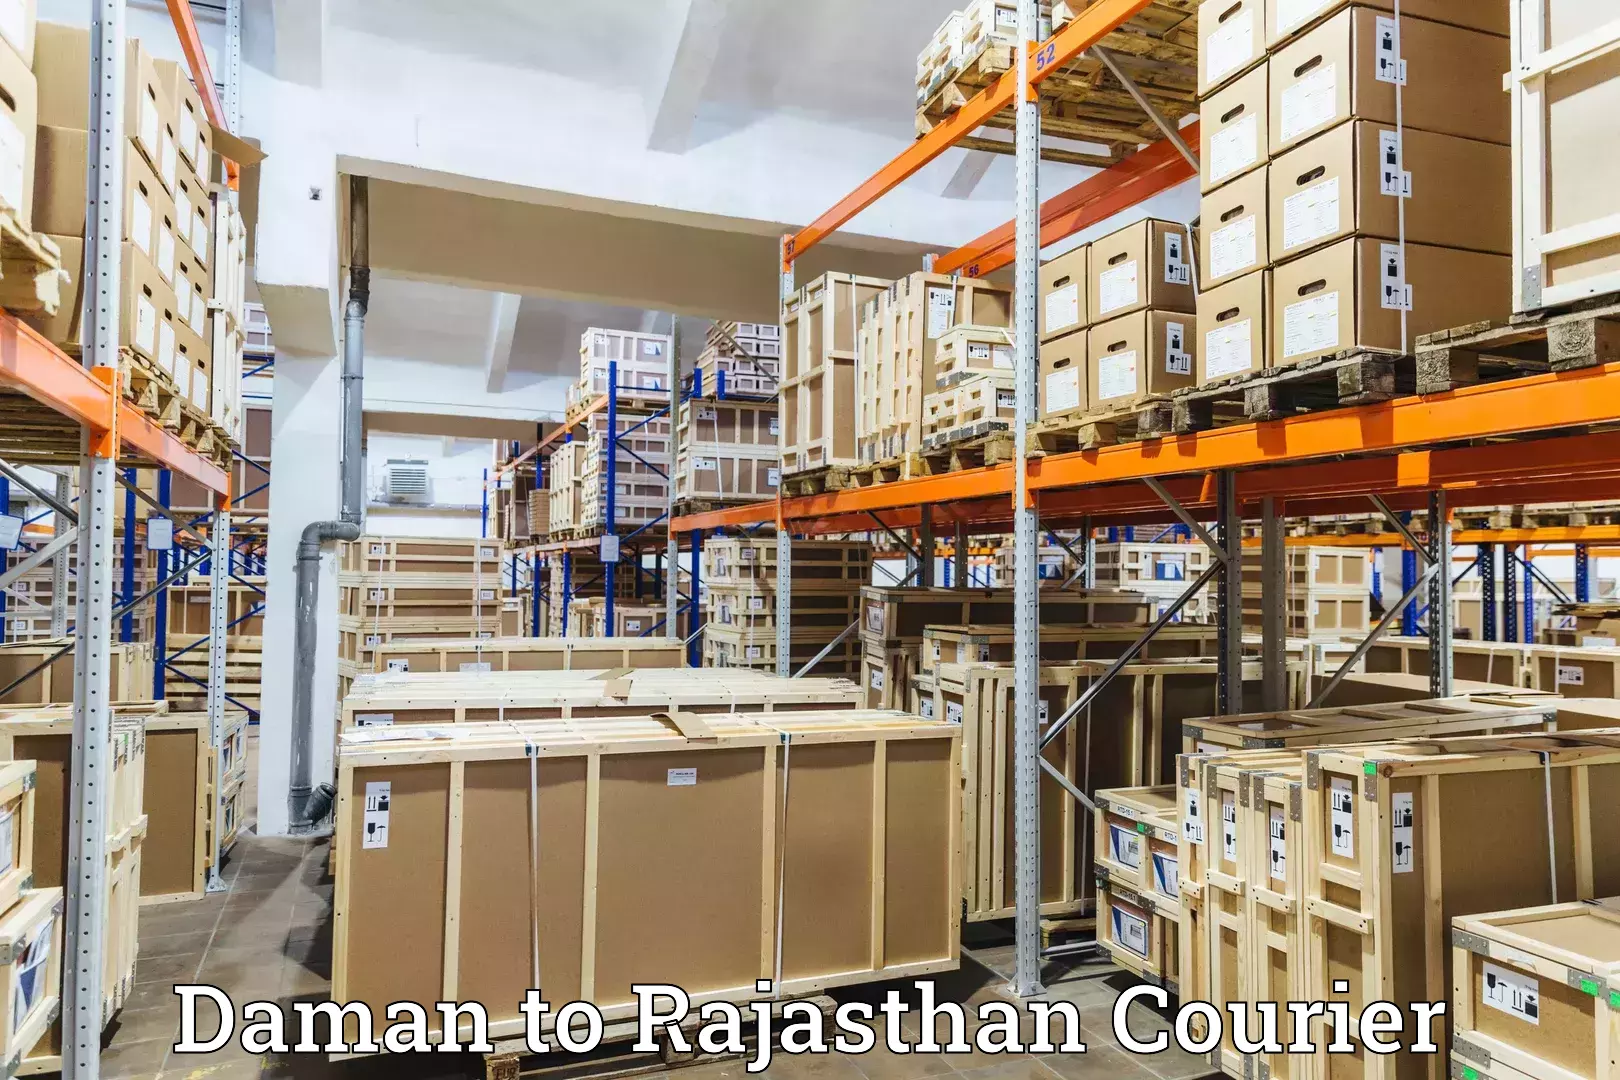 Efficient courier operations in Daman to Karauli